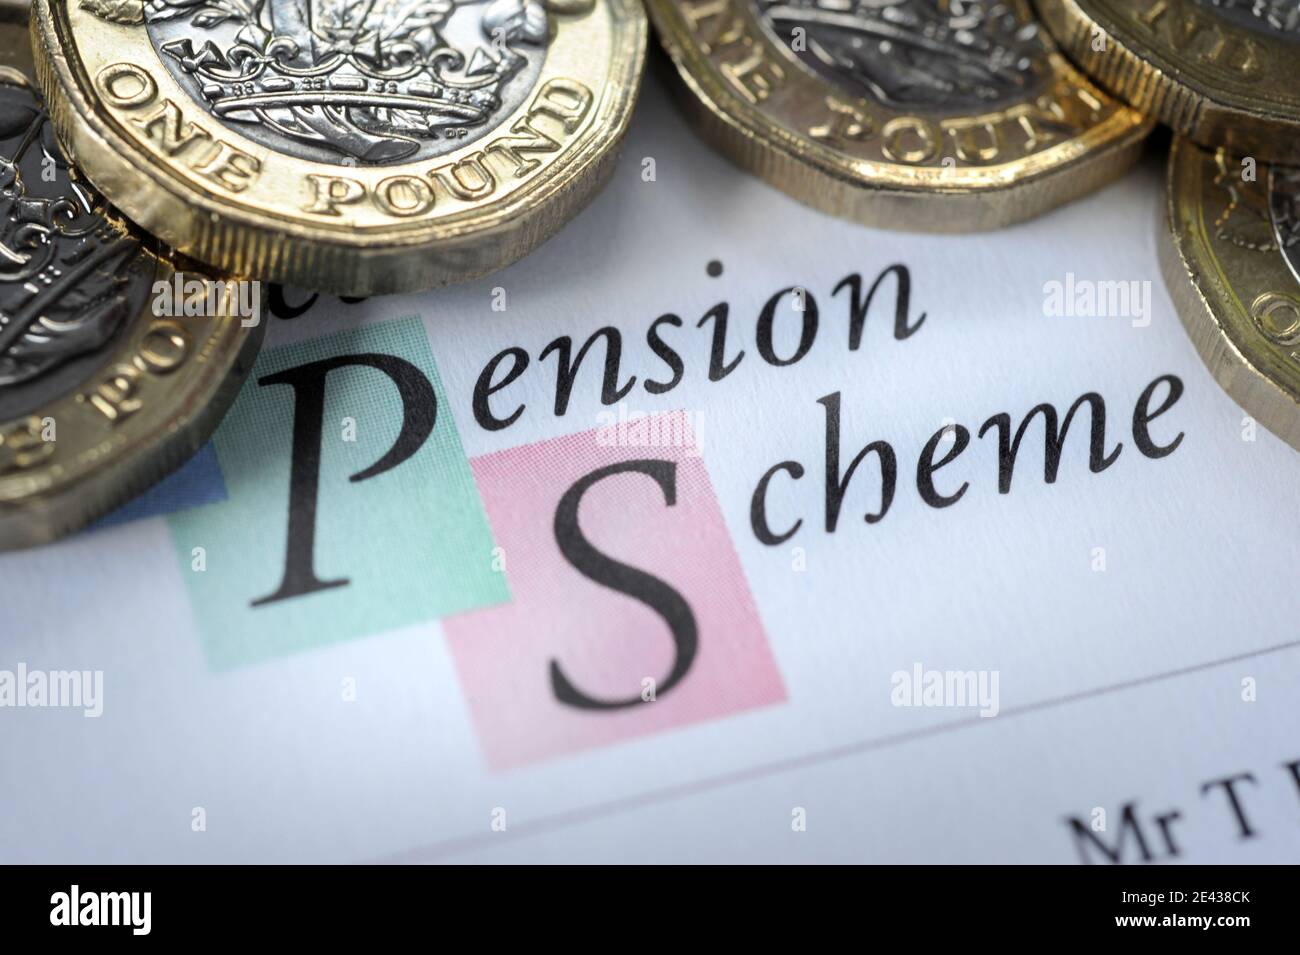 PENSION SCHEME LETTER WITH ONE POUND COINS RE PENSIONS PENSIONERS RETIREMENT SAVINGS ETC UK Stock Photo